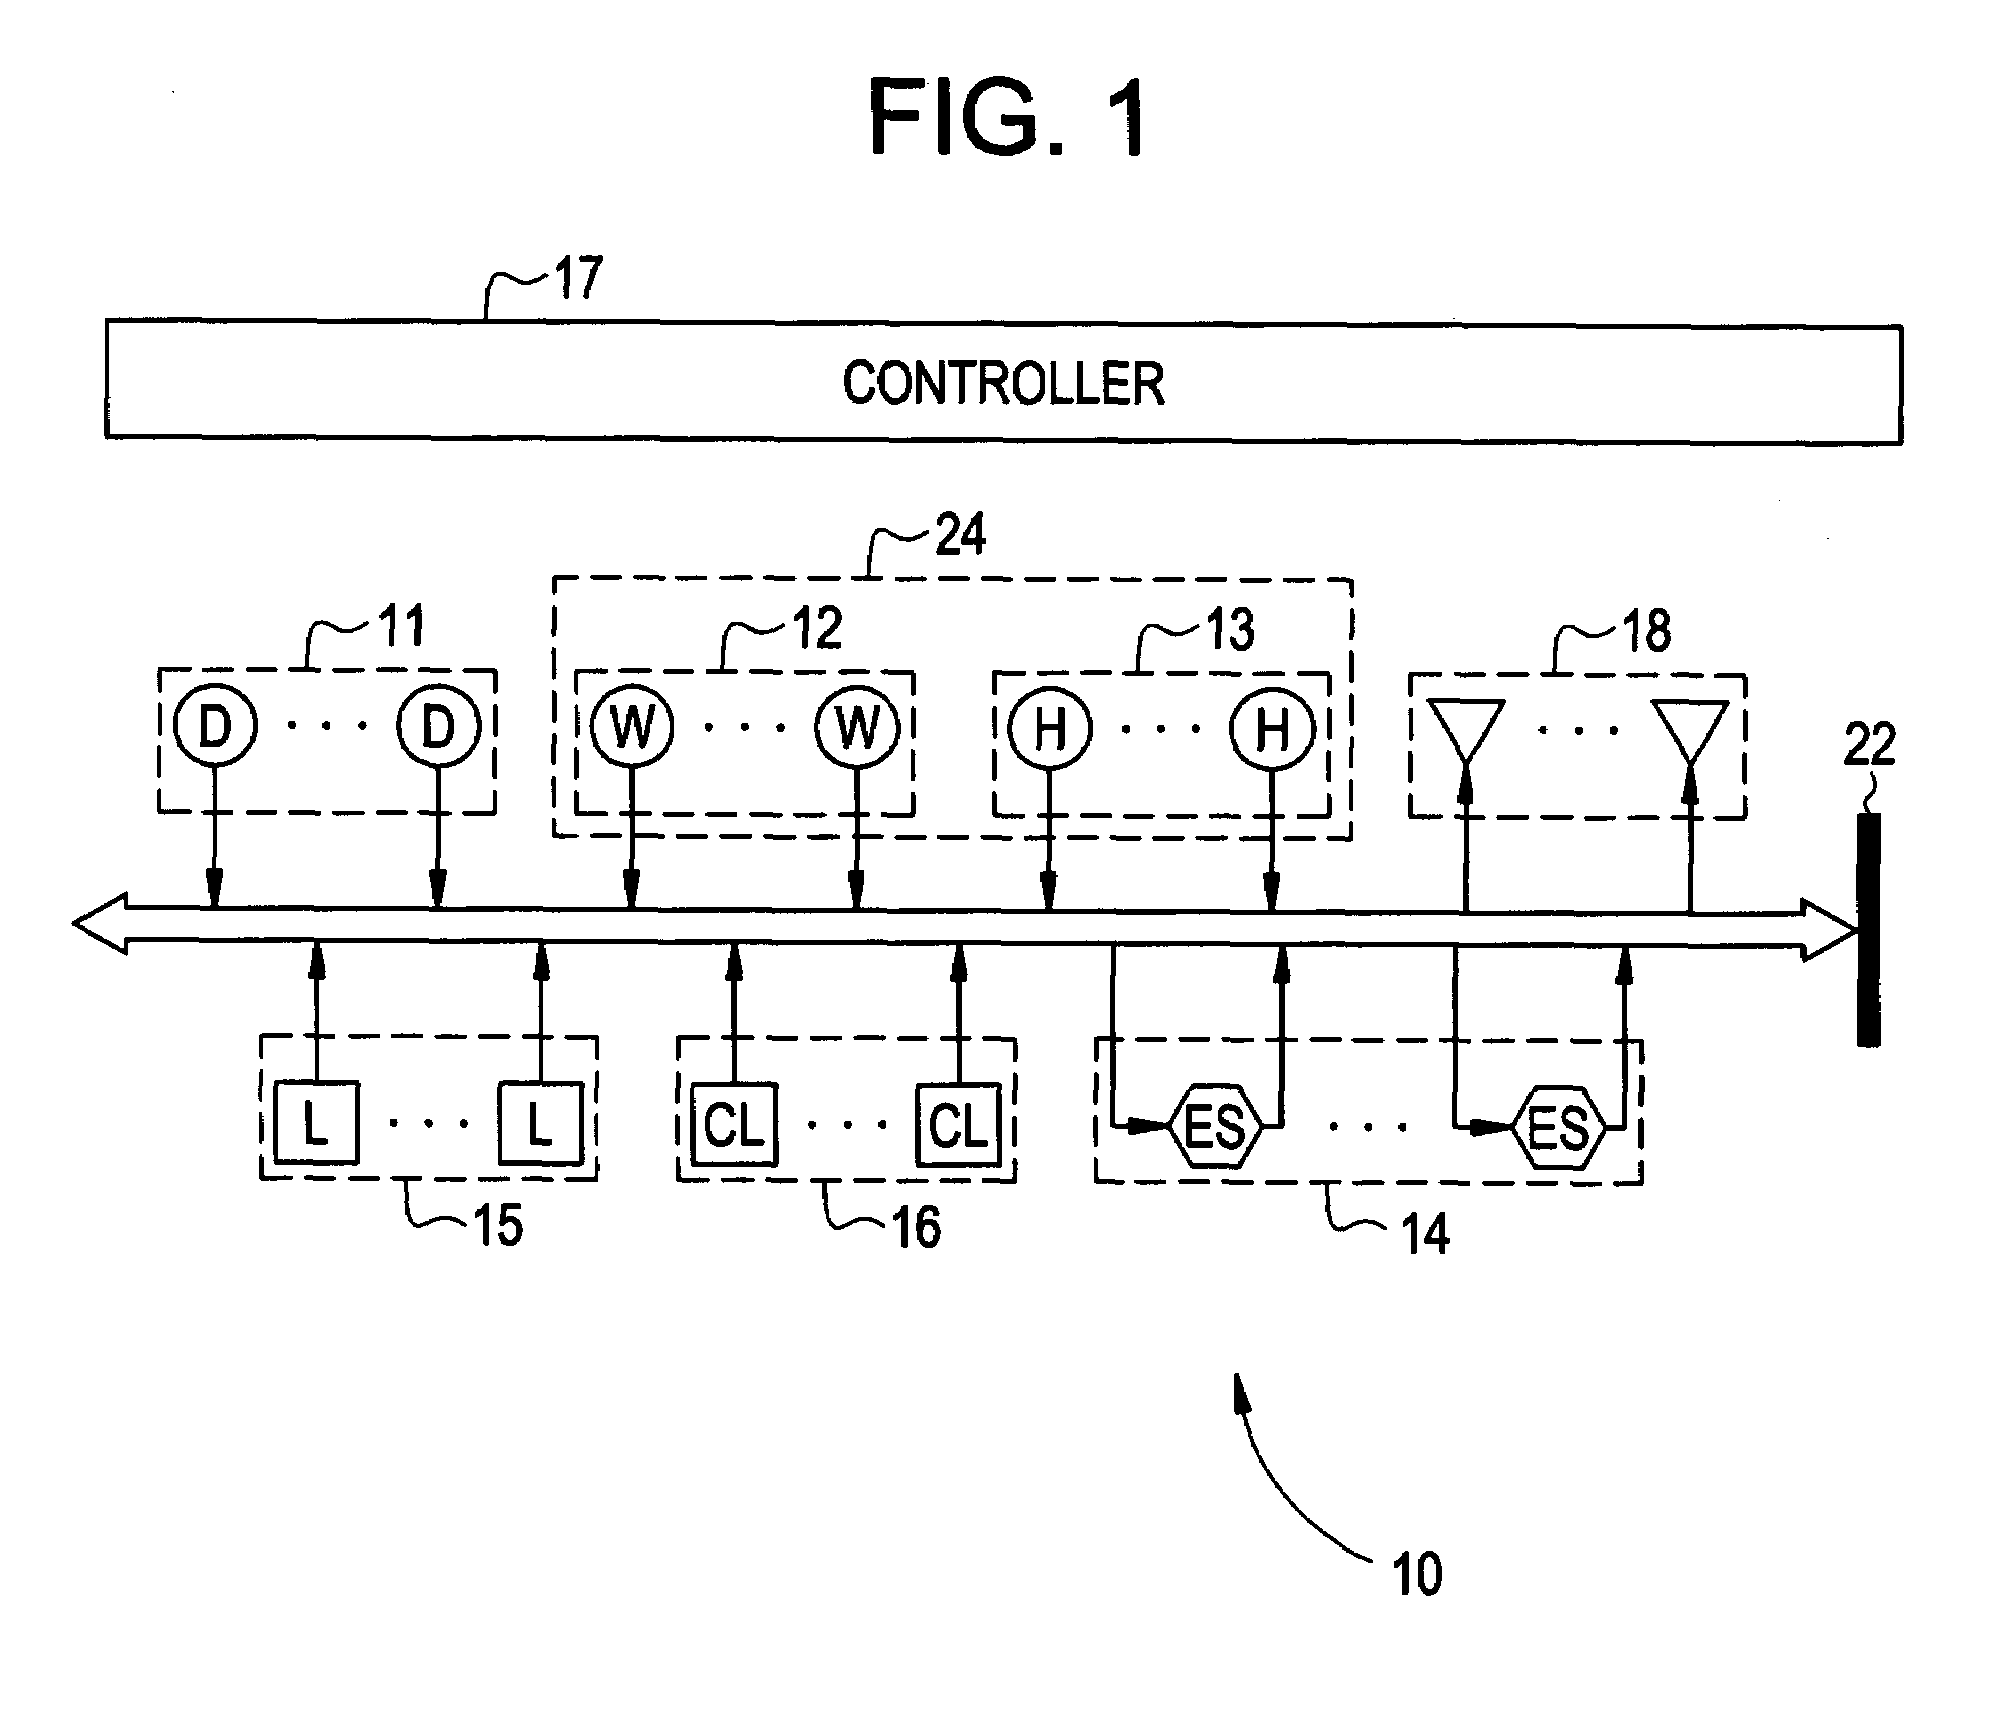 Multi-tier benefit optimization for operating the power systems including renewable and traditional generation, energy storage, and controllable loads